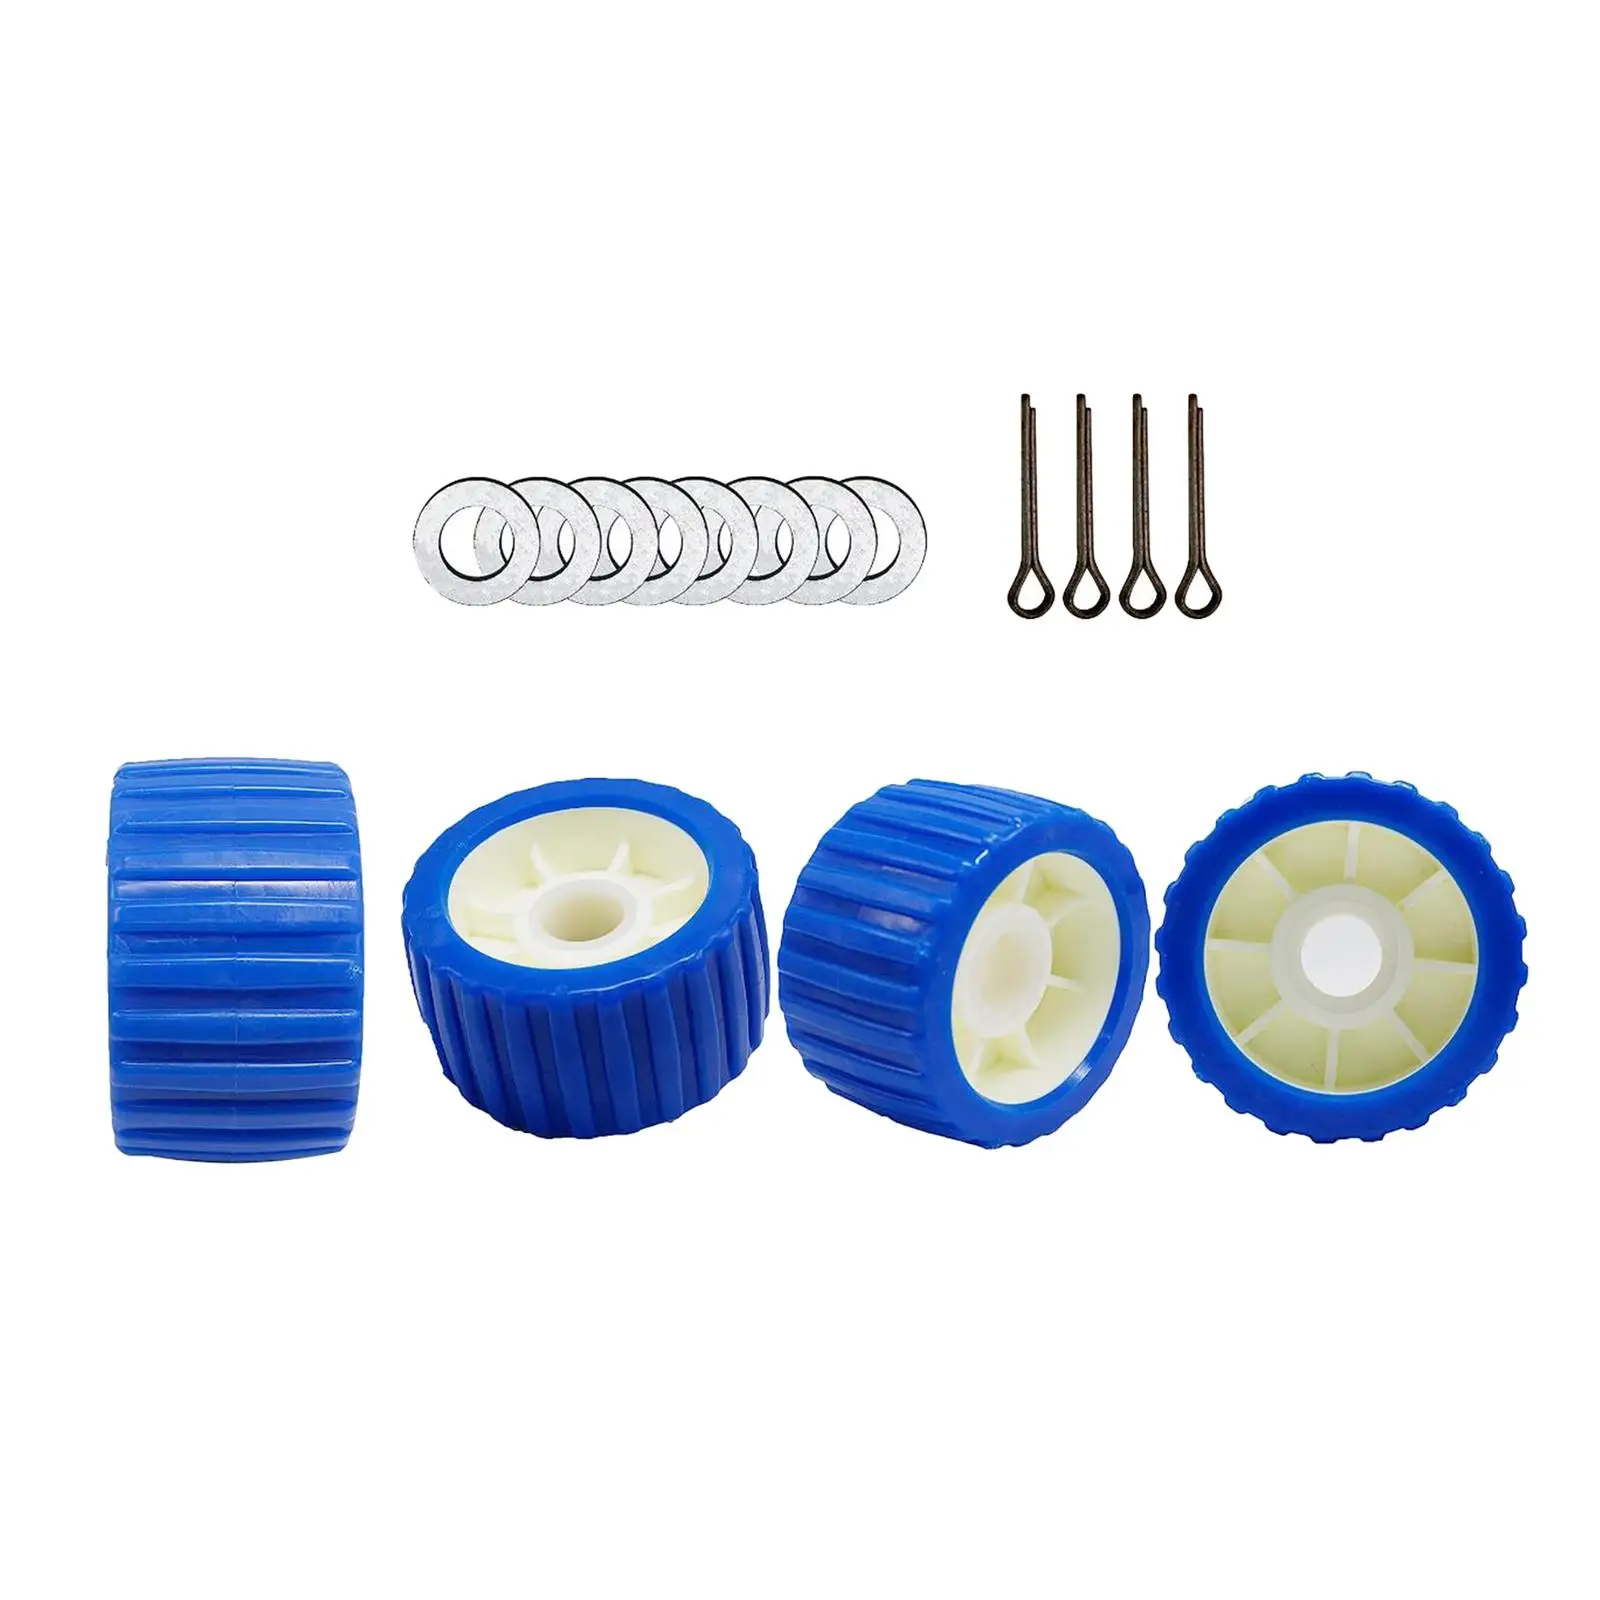 Trailer Roller Universal Heavy Duty Trailer Parts Accessories for Motor Yacht